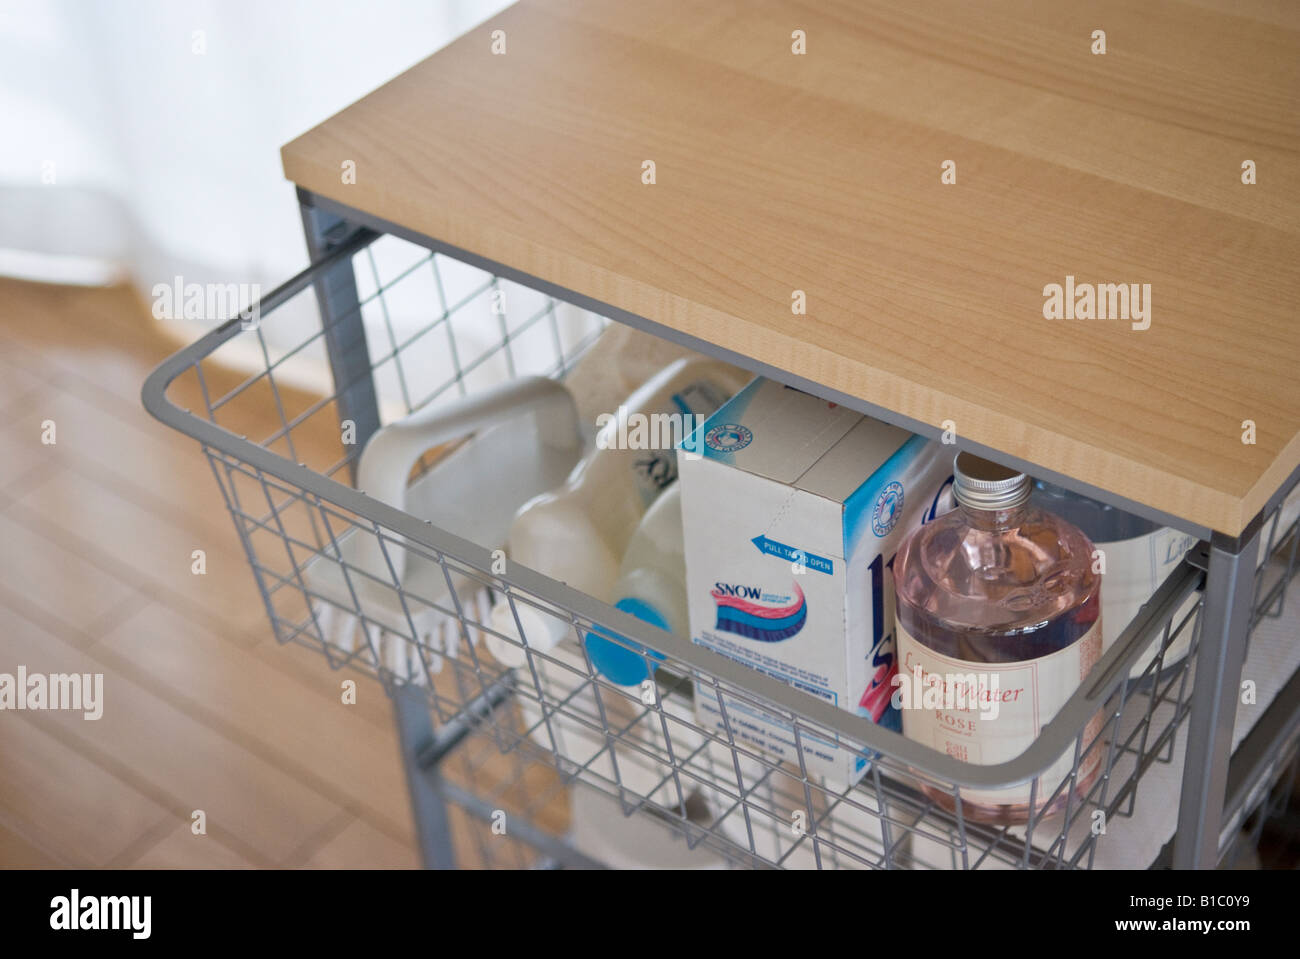 Detergents in drawer Stock Photo